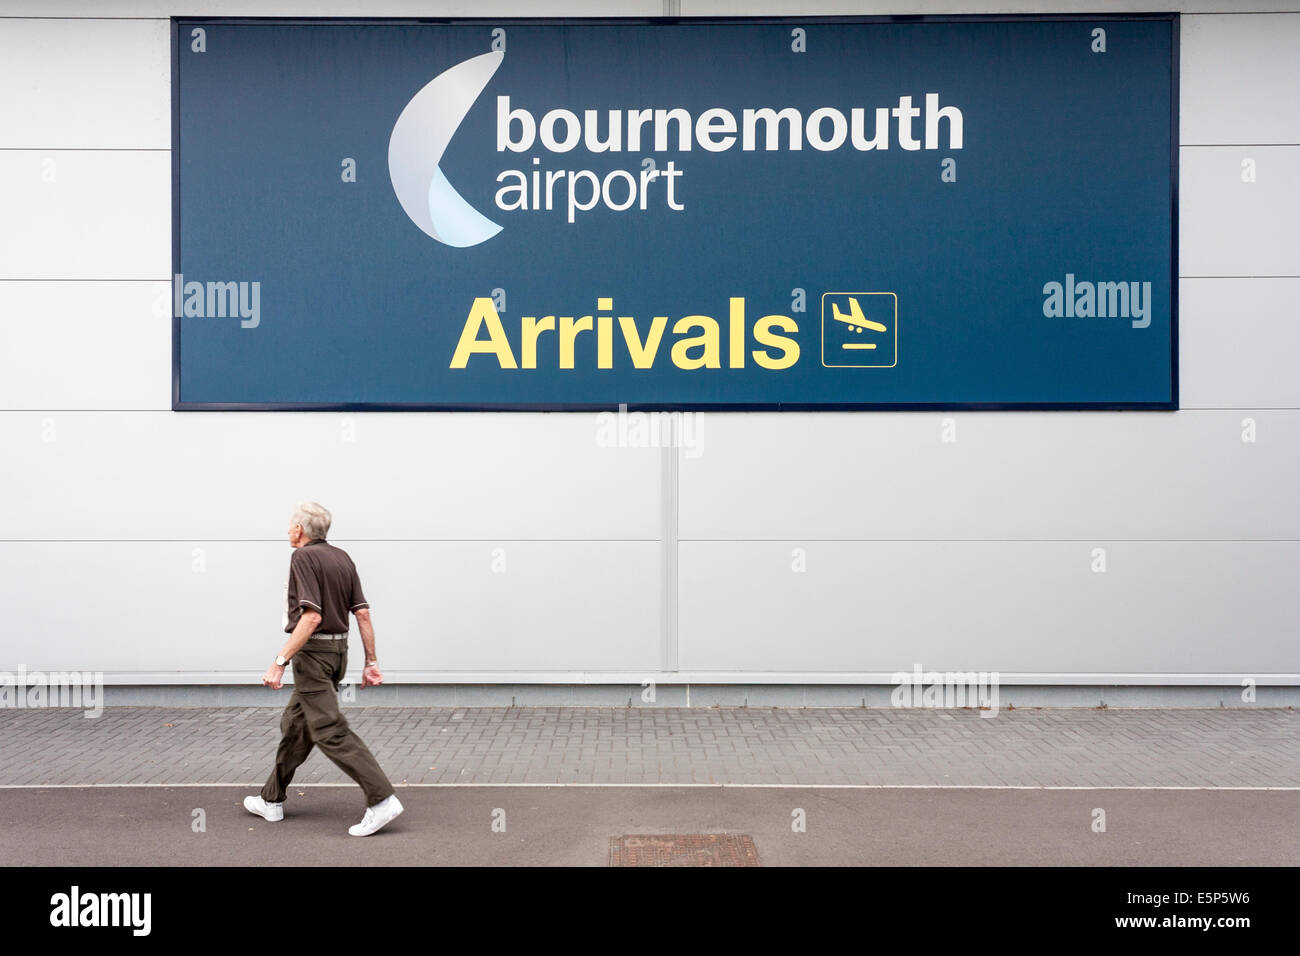 Bournemouth Airport arrivals sign Stock Photo